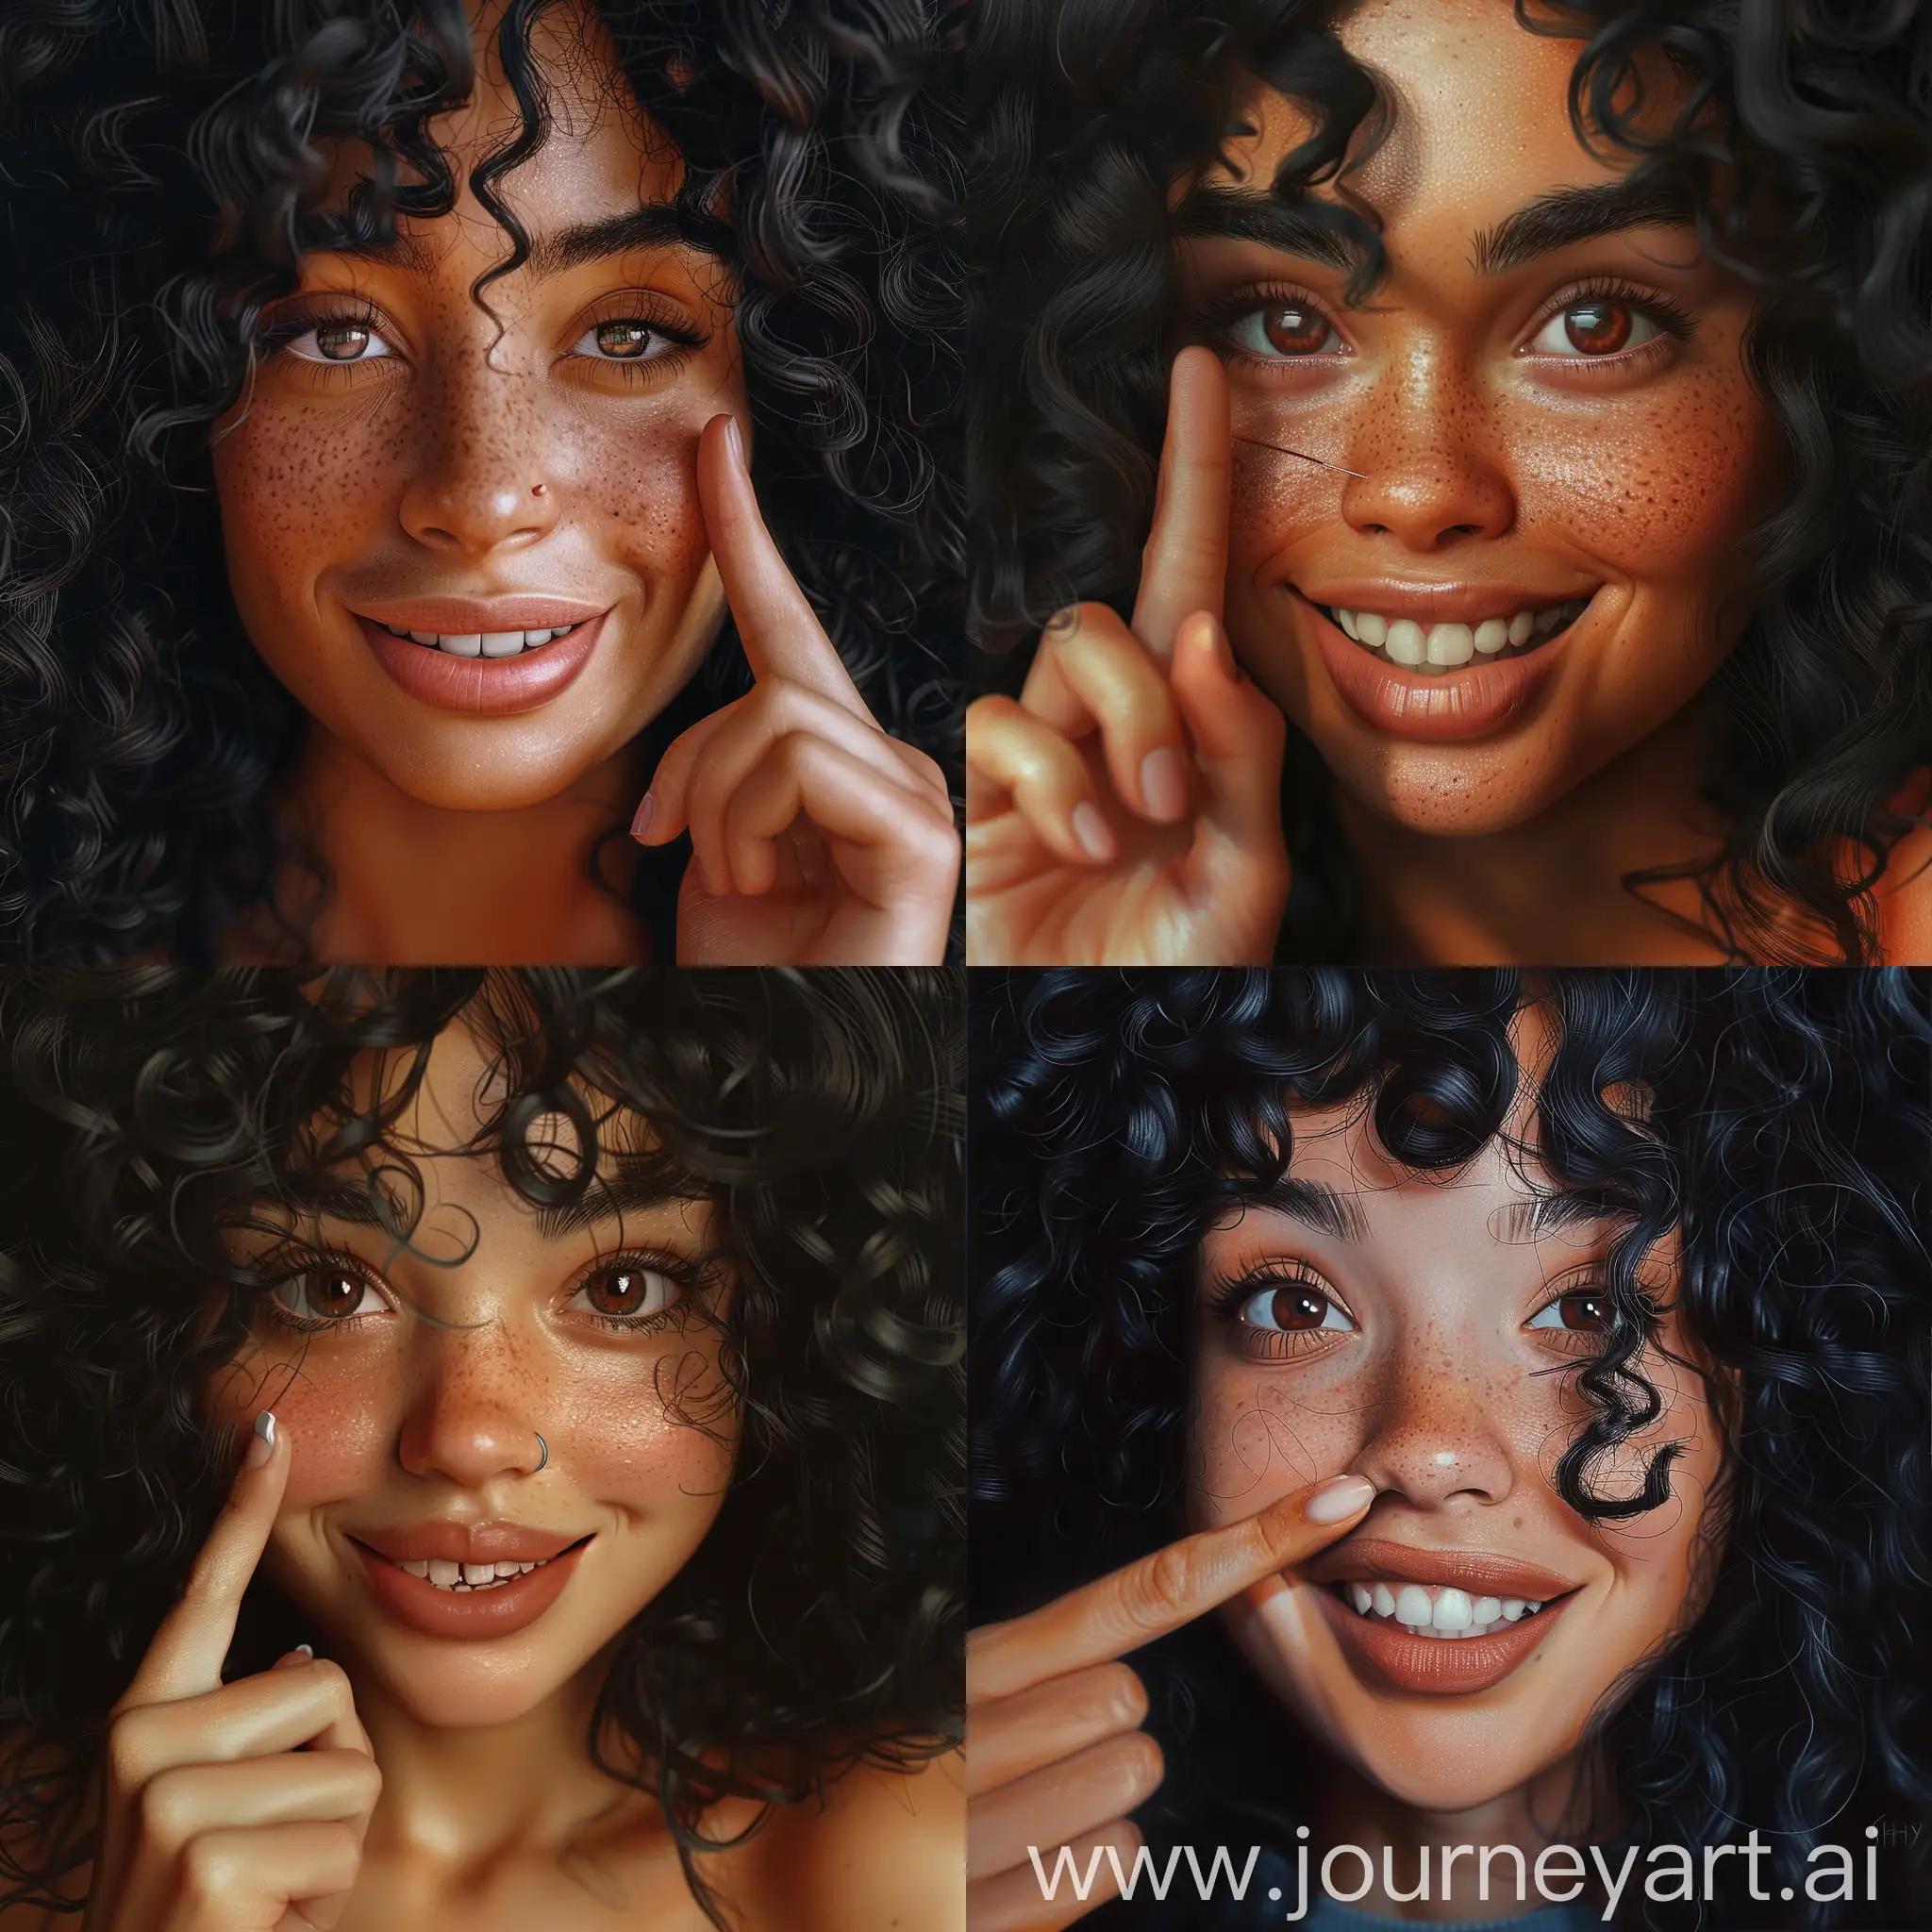 Captivating-Laughing-Girl-with-Expressive-Brown-Eyes-and-Curly-Black-Hair